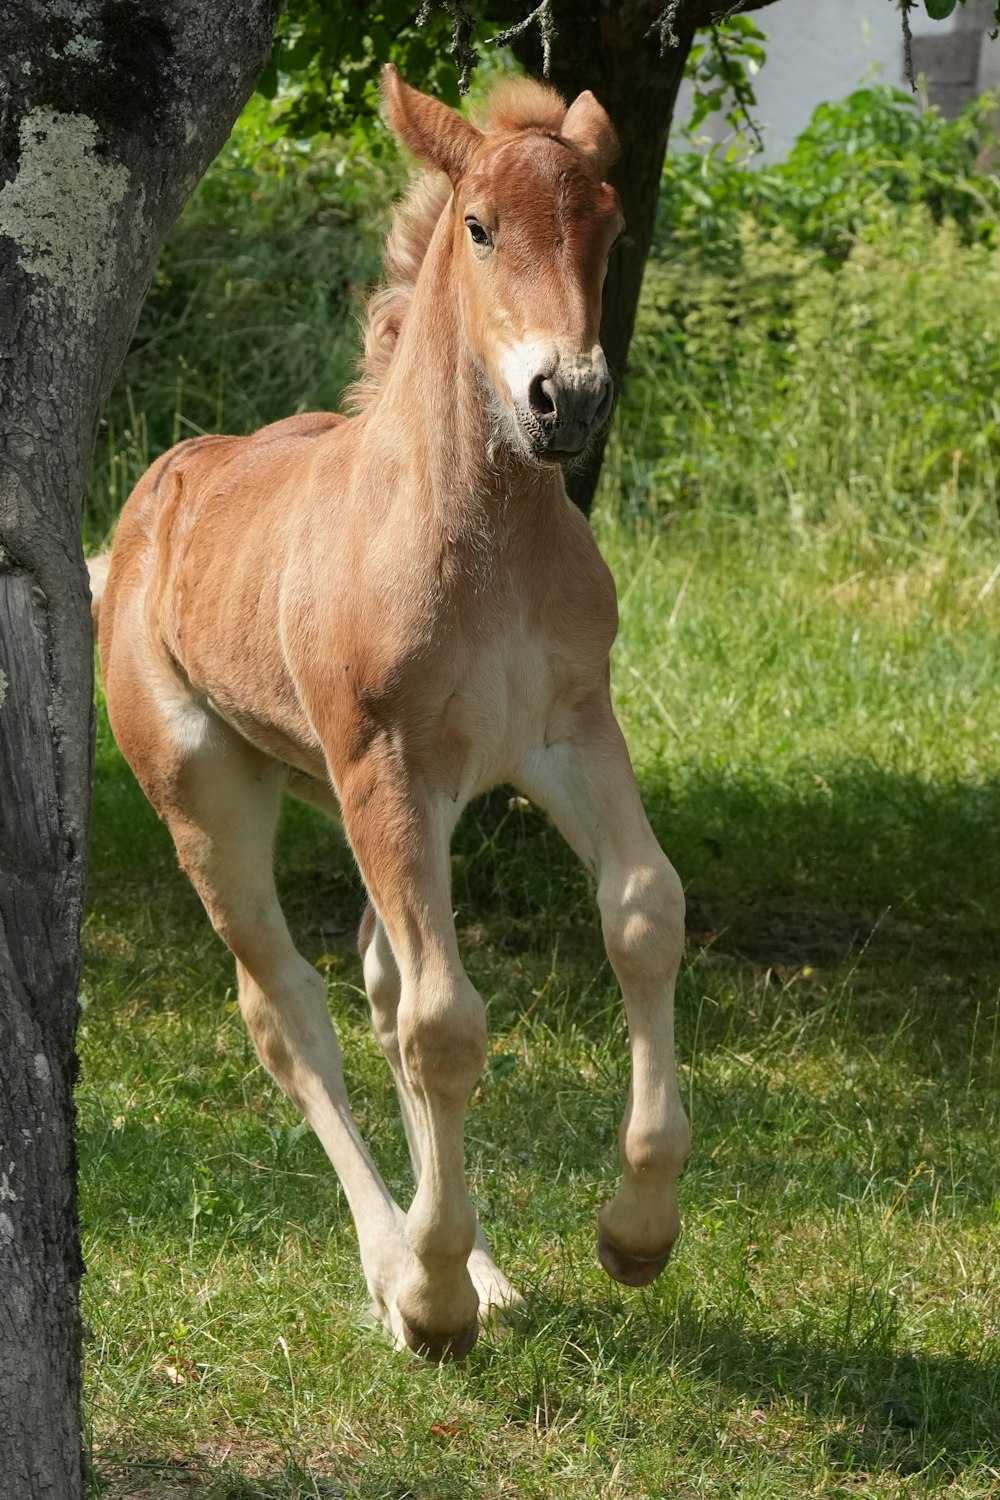 a small horse running through a field next to a tree